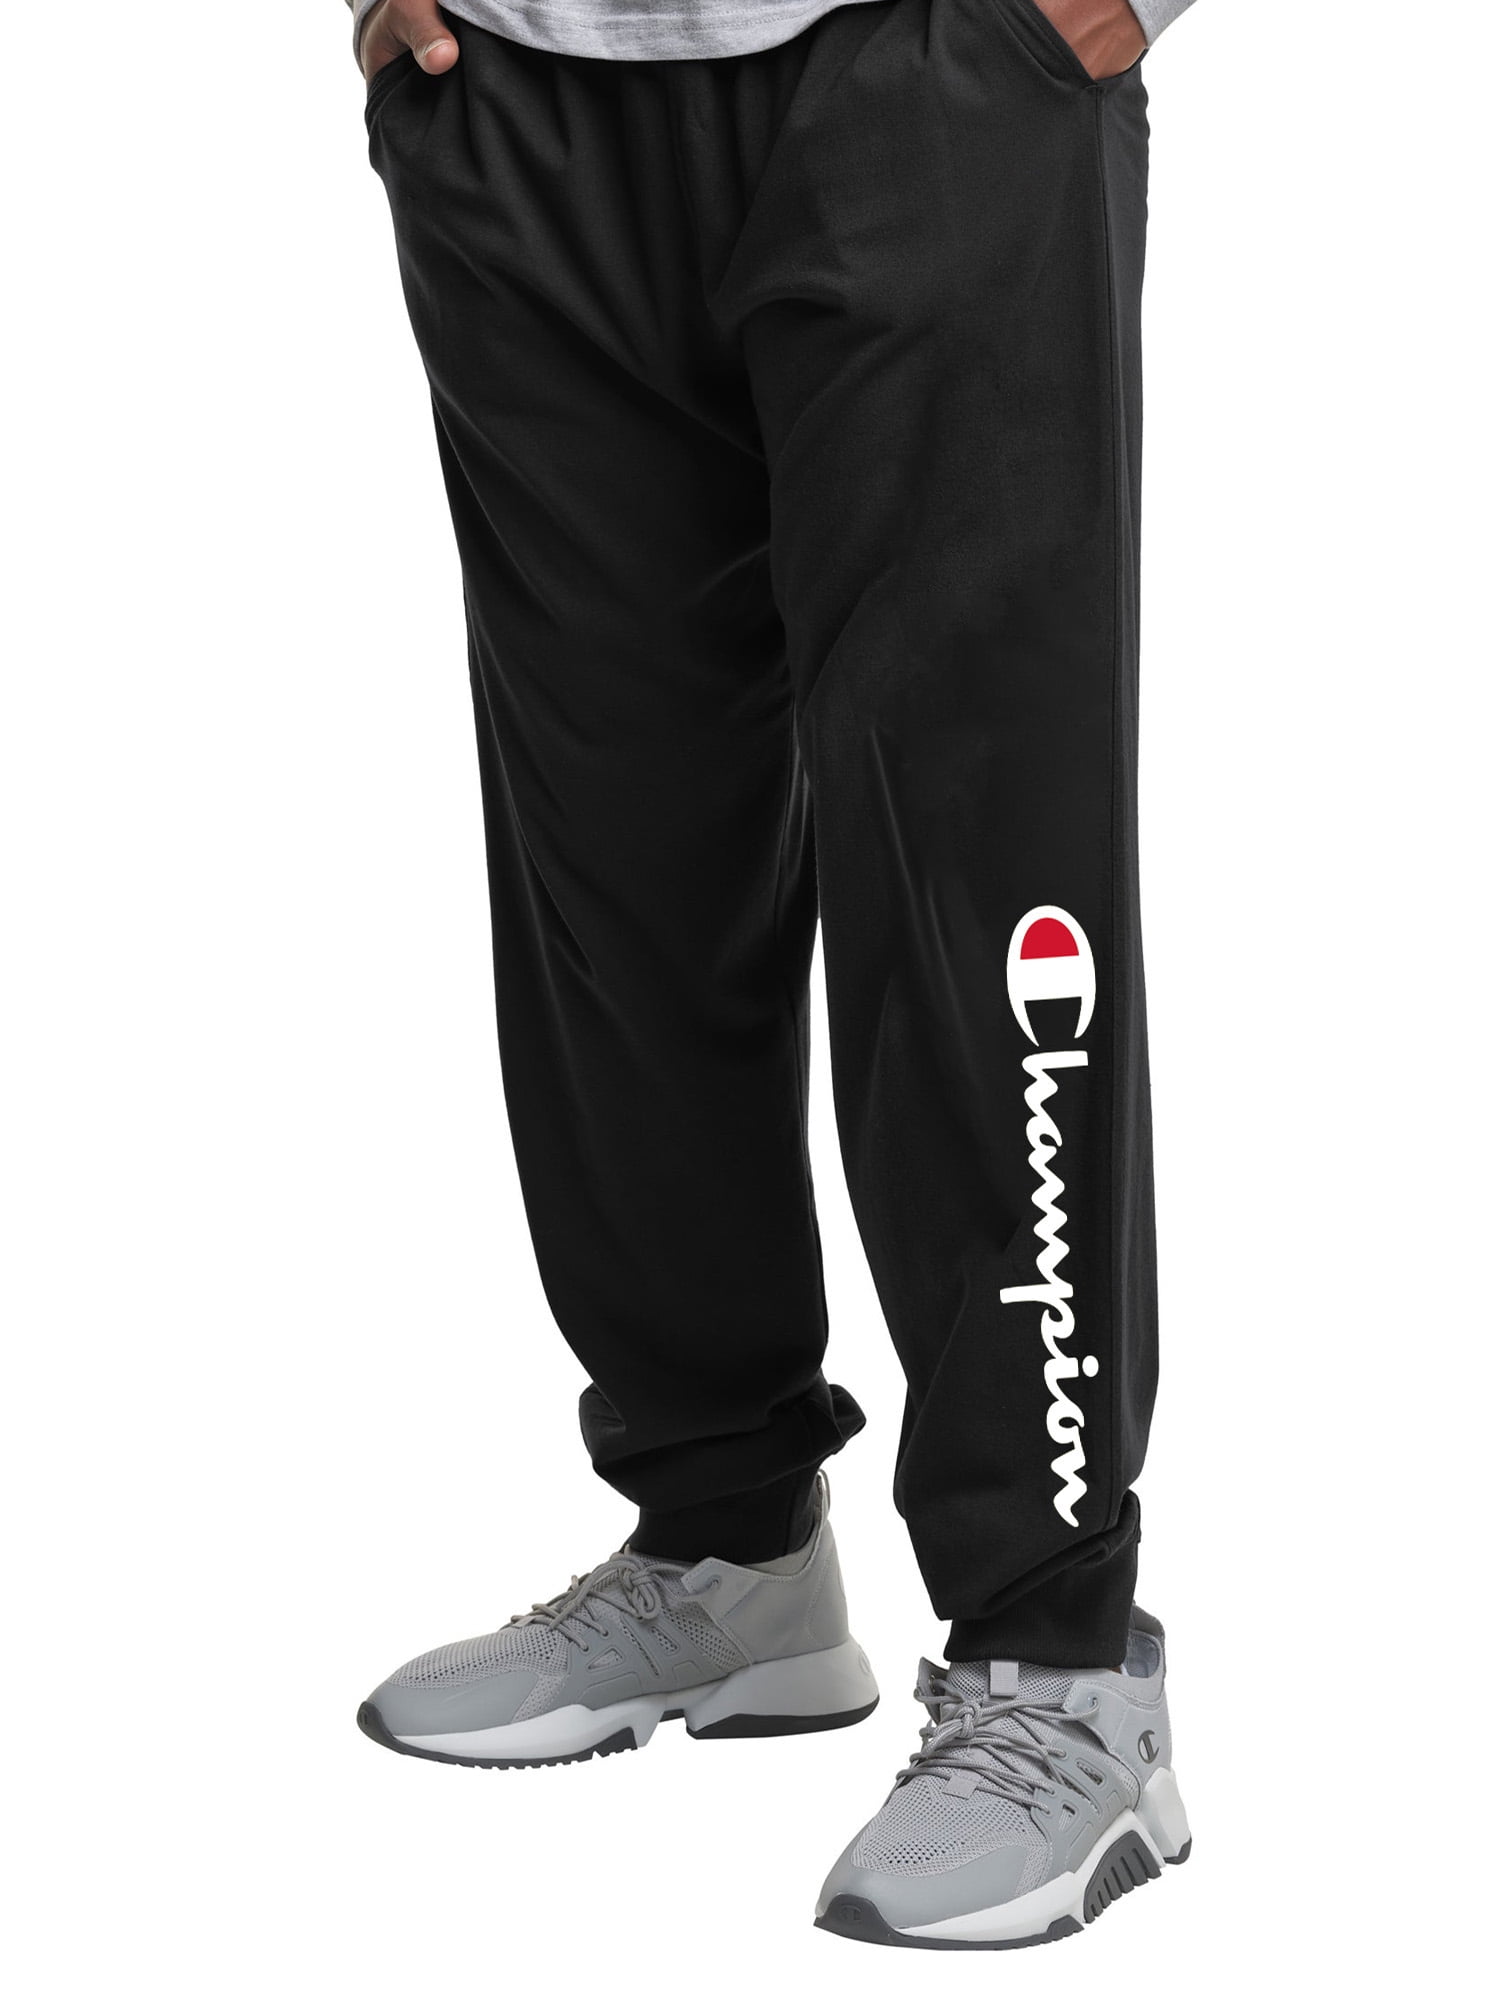 Champion Sweatpants Men's Fleece Big & Tall athletic fit Breathable Pockets Draw 